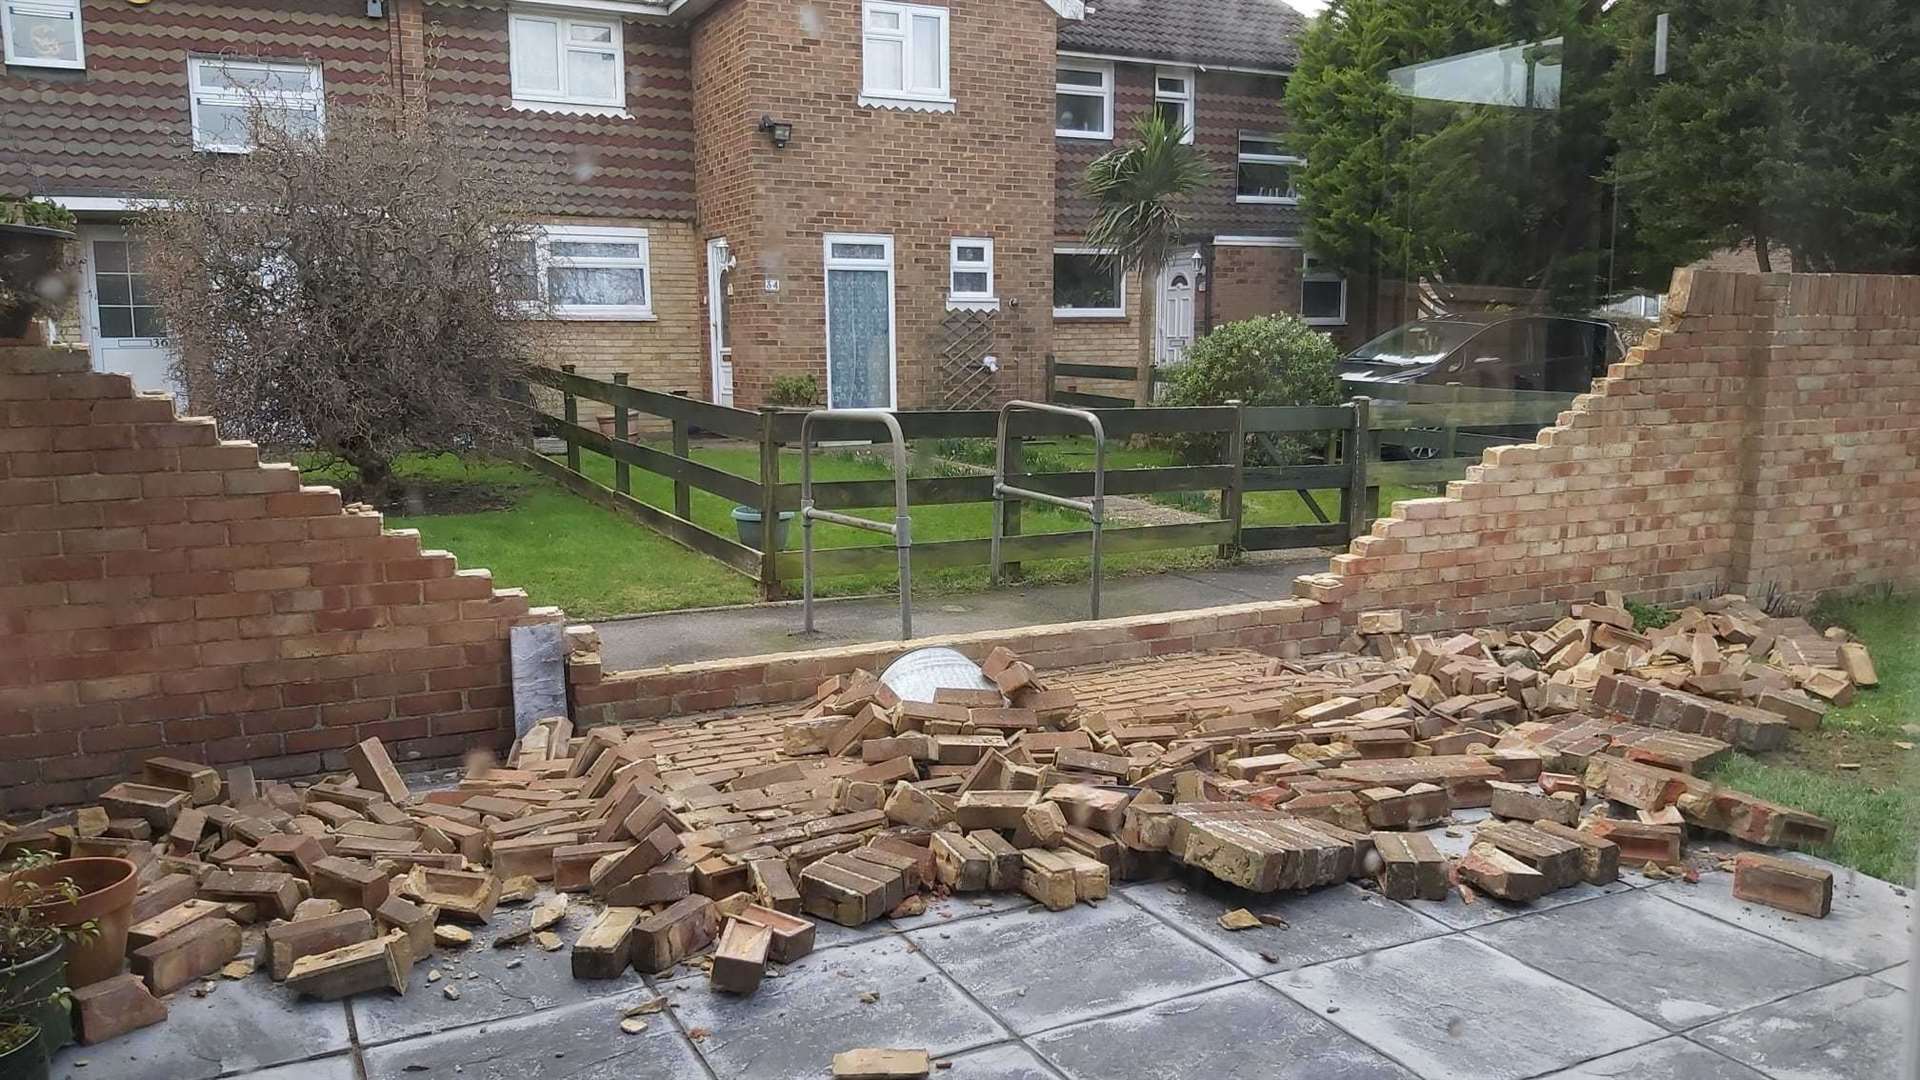 A garden wall has collapsed in Meopham, Gravesend due to Storm Eunice